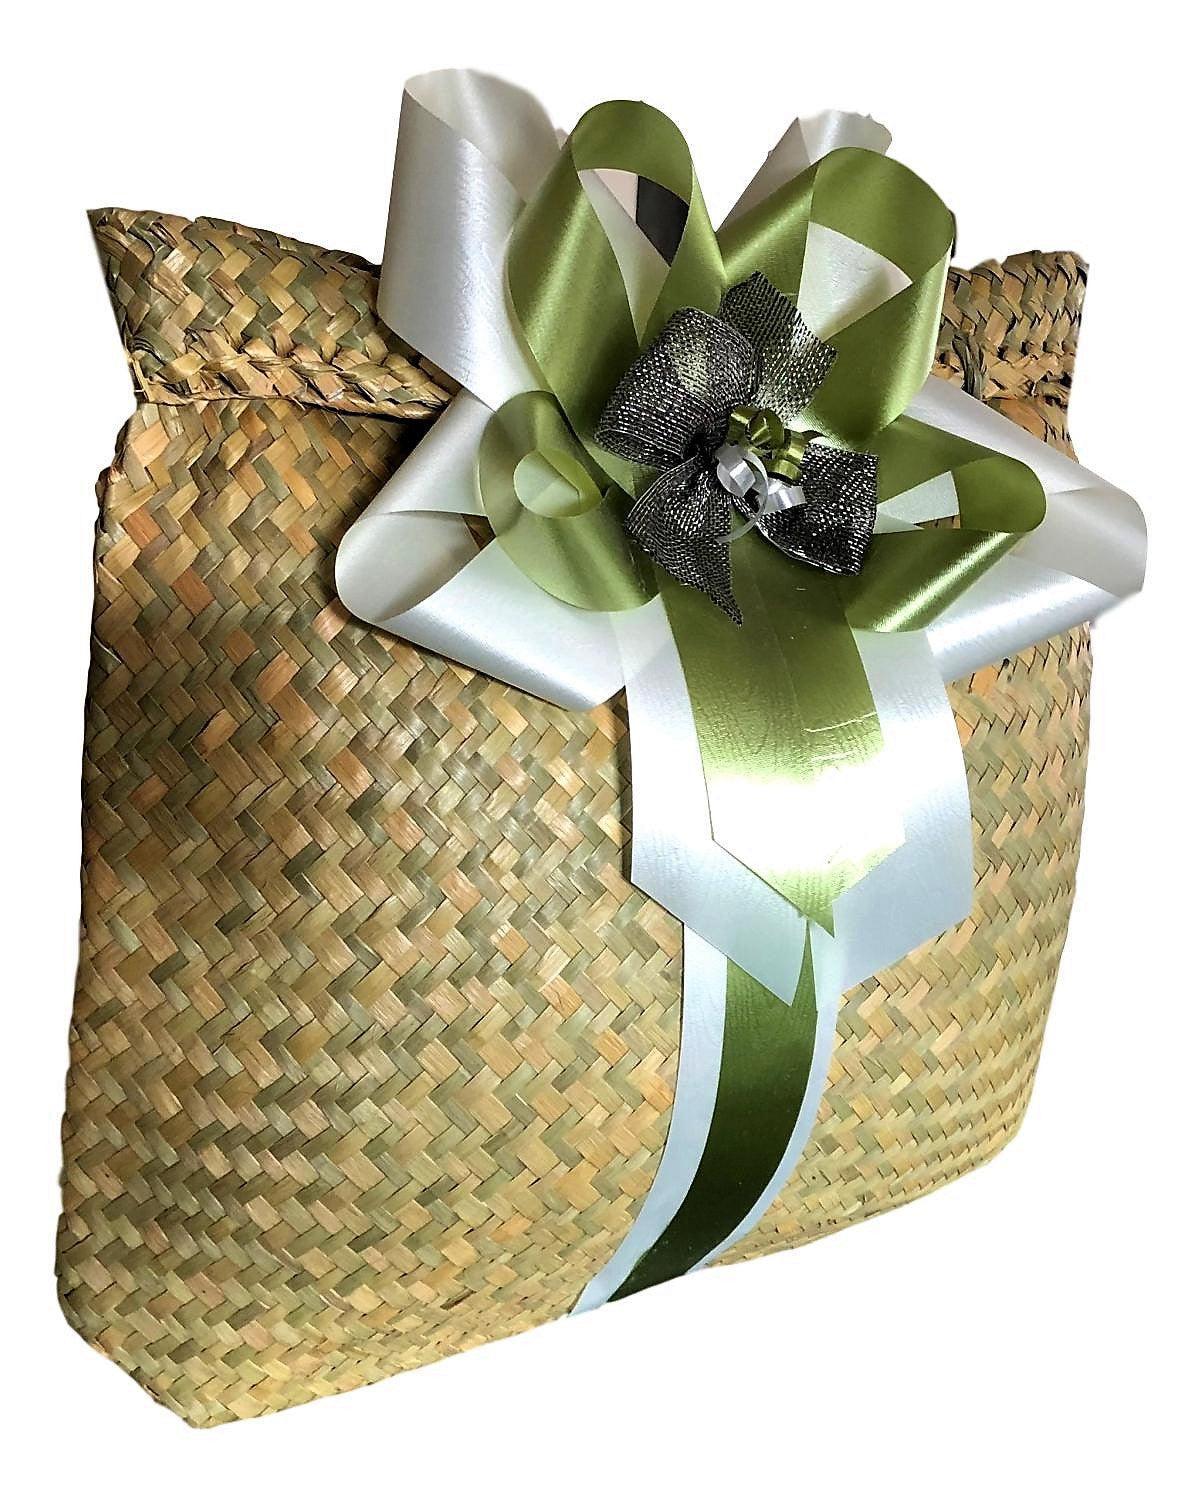 Gluten Free Gift Hampers & Baskets for Coeliacs - Basket Creations NZ